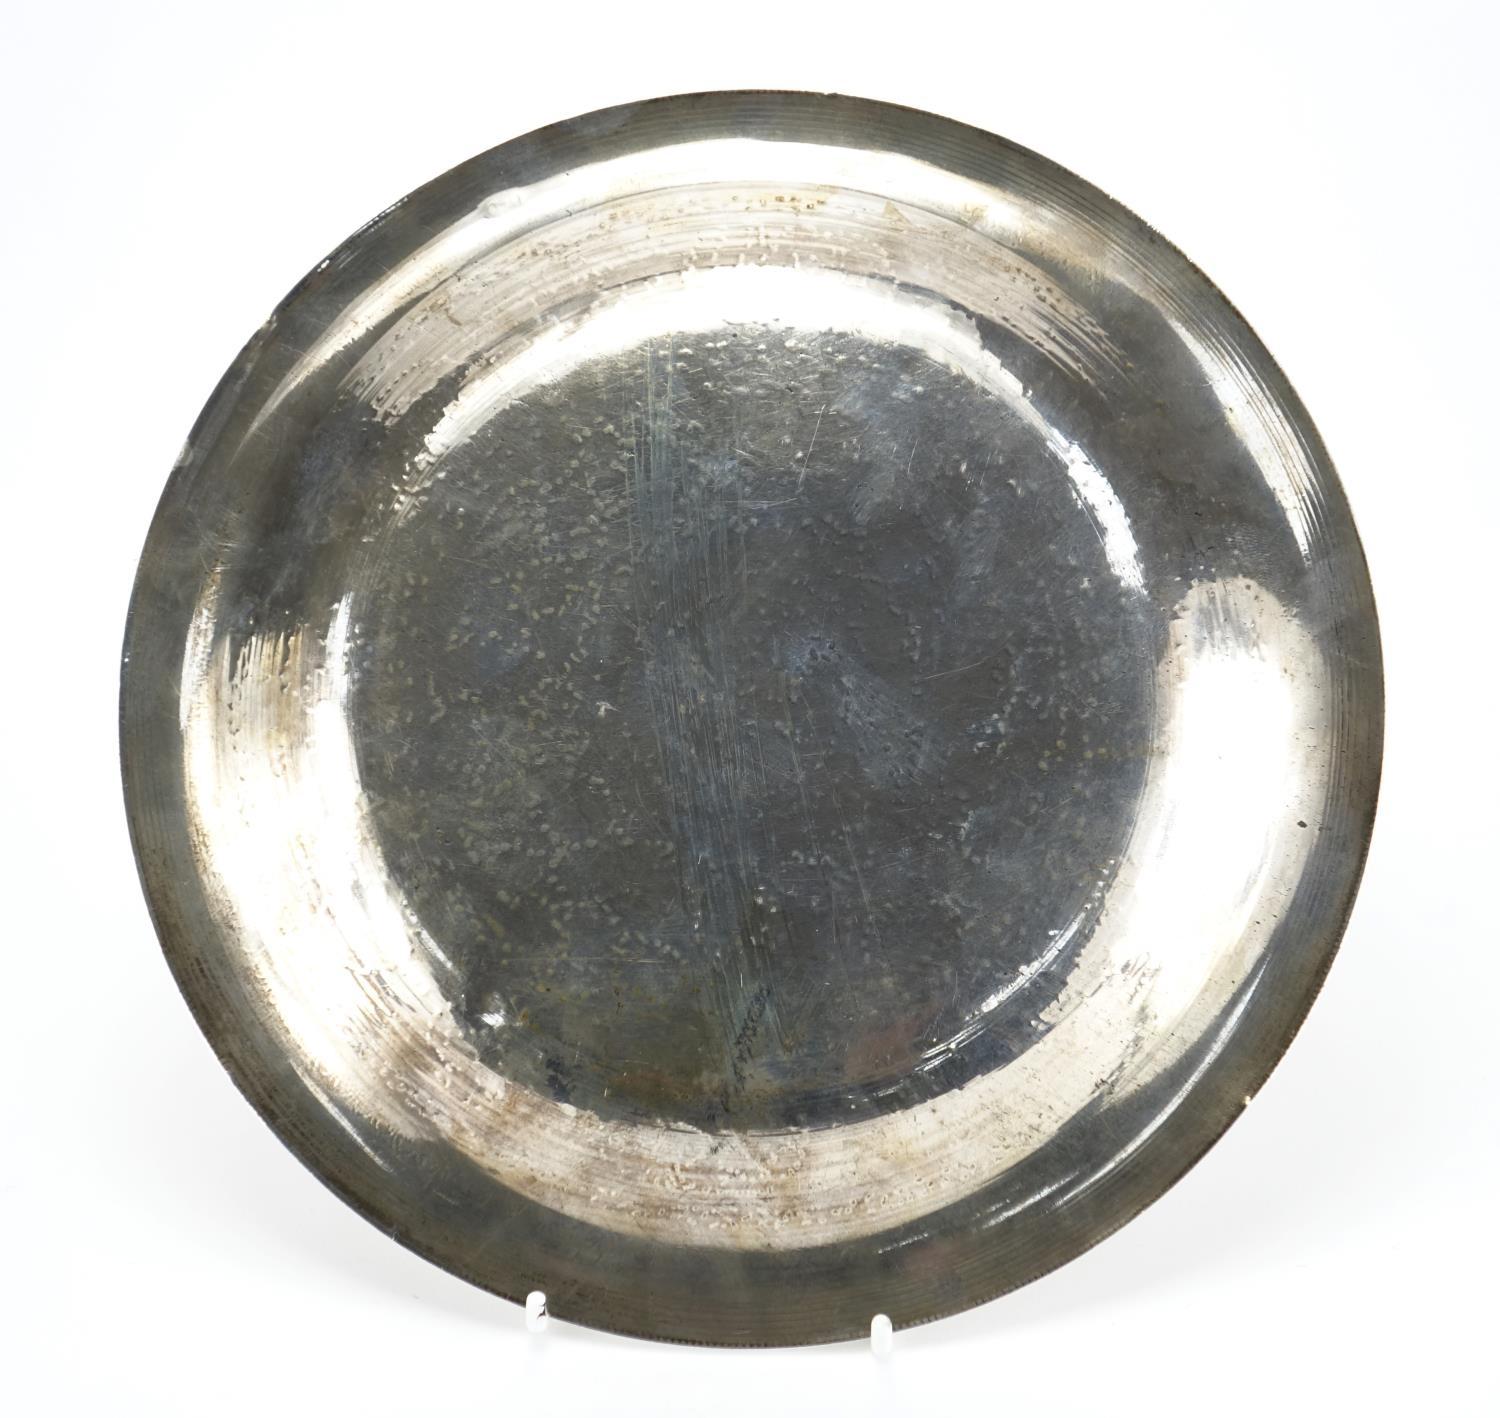 Islamic unmarked silver dish, engraved with script and foliate motifs, 23cm in diameter, approximate - Image 3 of 3